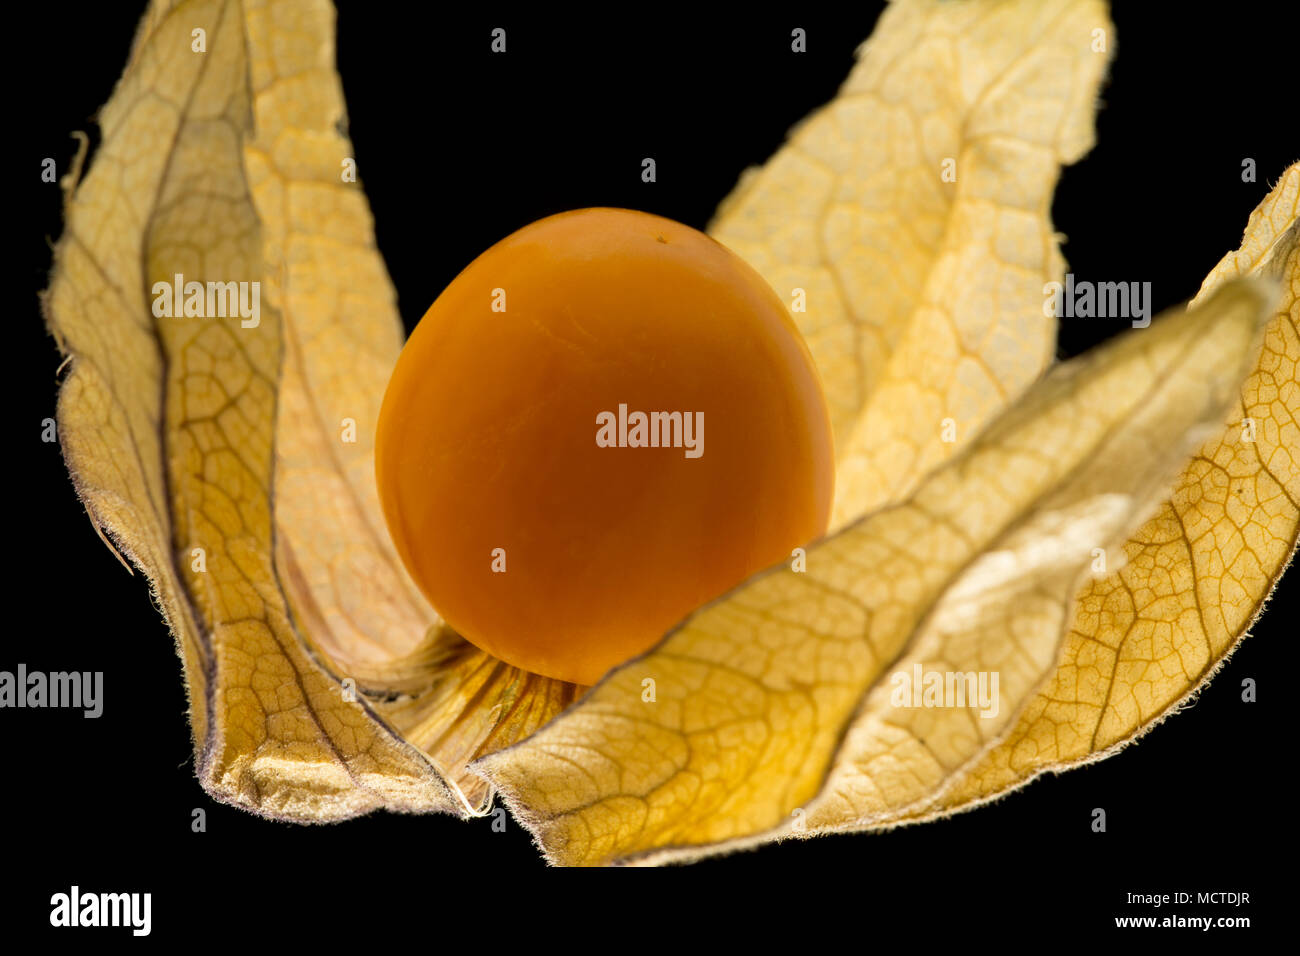 A physalis fruit and husk on a black background bought from a supermarket in England UK GB Stock Photo